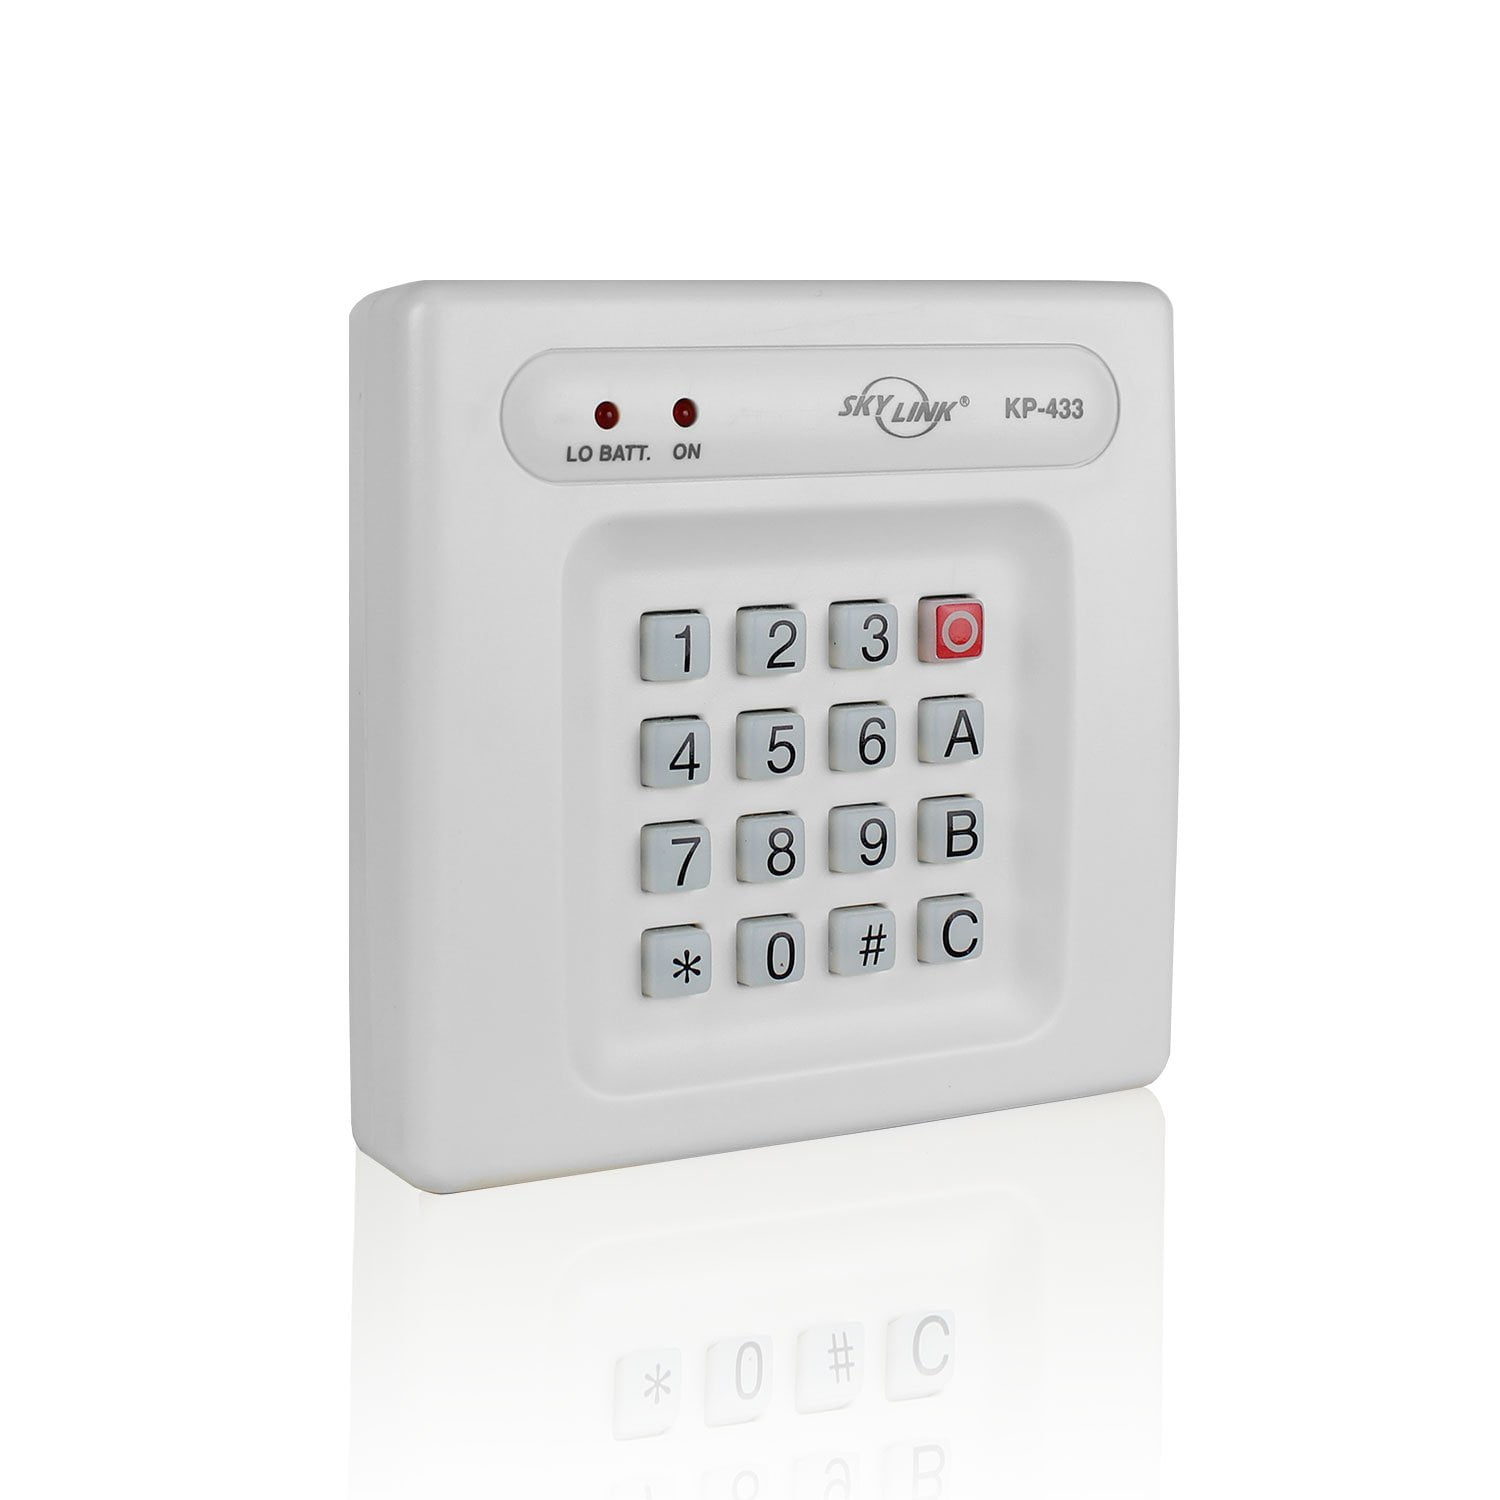 KP-434W Wireless Remote Entry Exit Access Wall Control Security Burglar Alarm Protection Keypad | Affordable Easy to Install DIY, NO MONTHLY FEES and easy DIY (Do It.., By Skylink